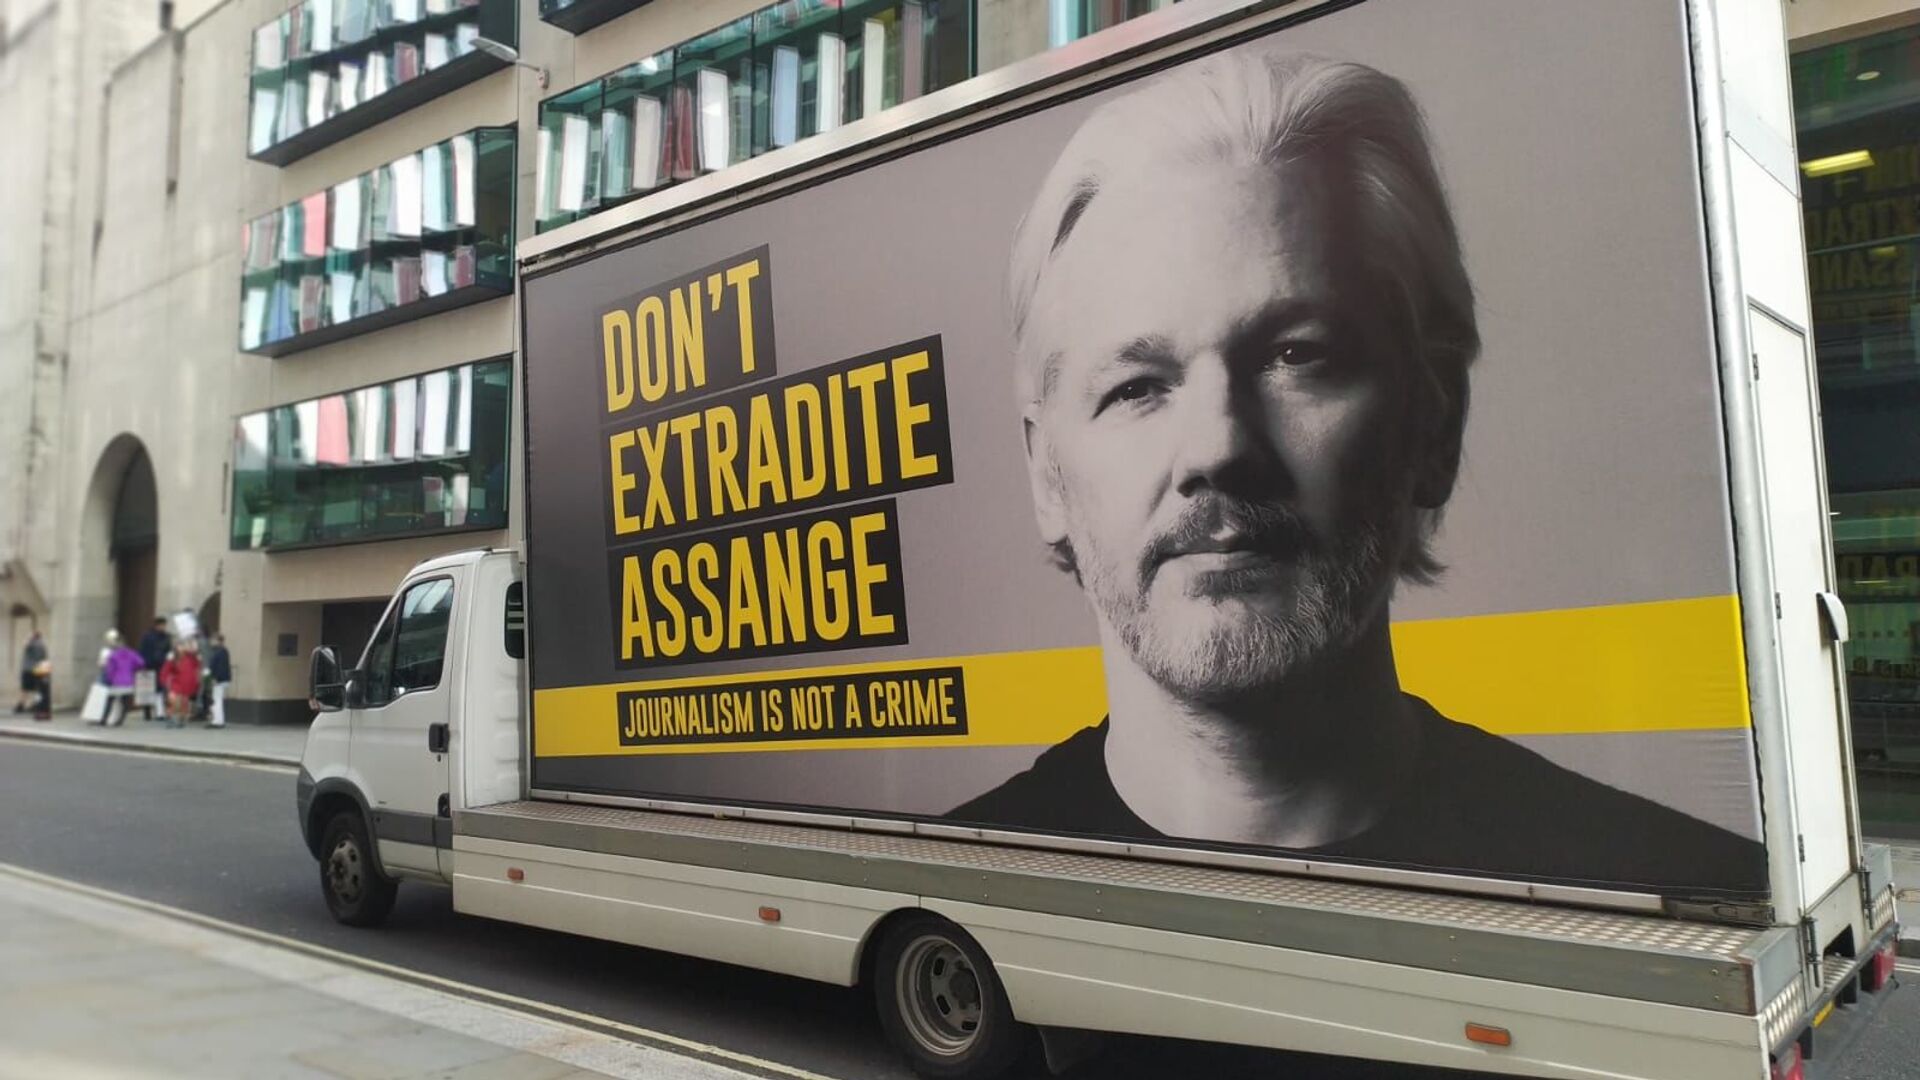 Van with banner on it saying Don't Extradite Assange - Journalism is Not a Crime passes by Old Bailey on 28 September 2020 - Sputnik International, 1920, 21.04.2022